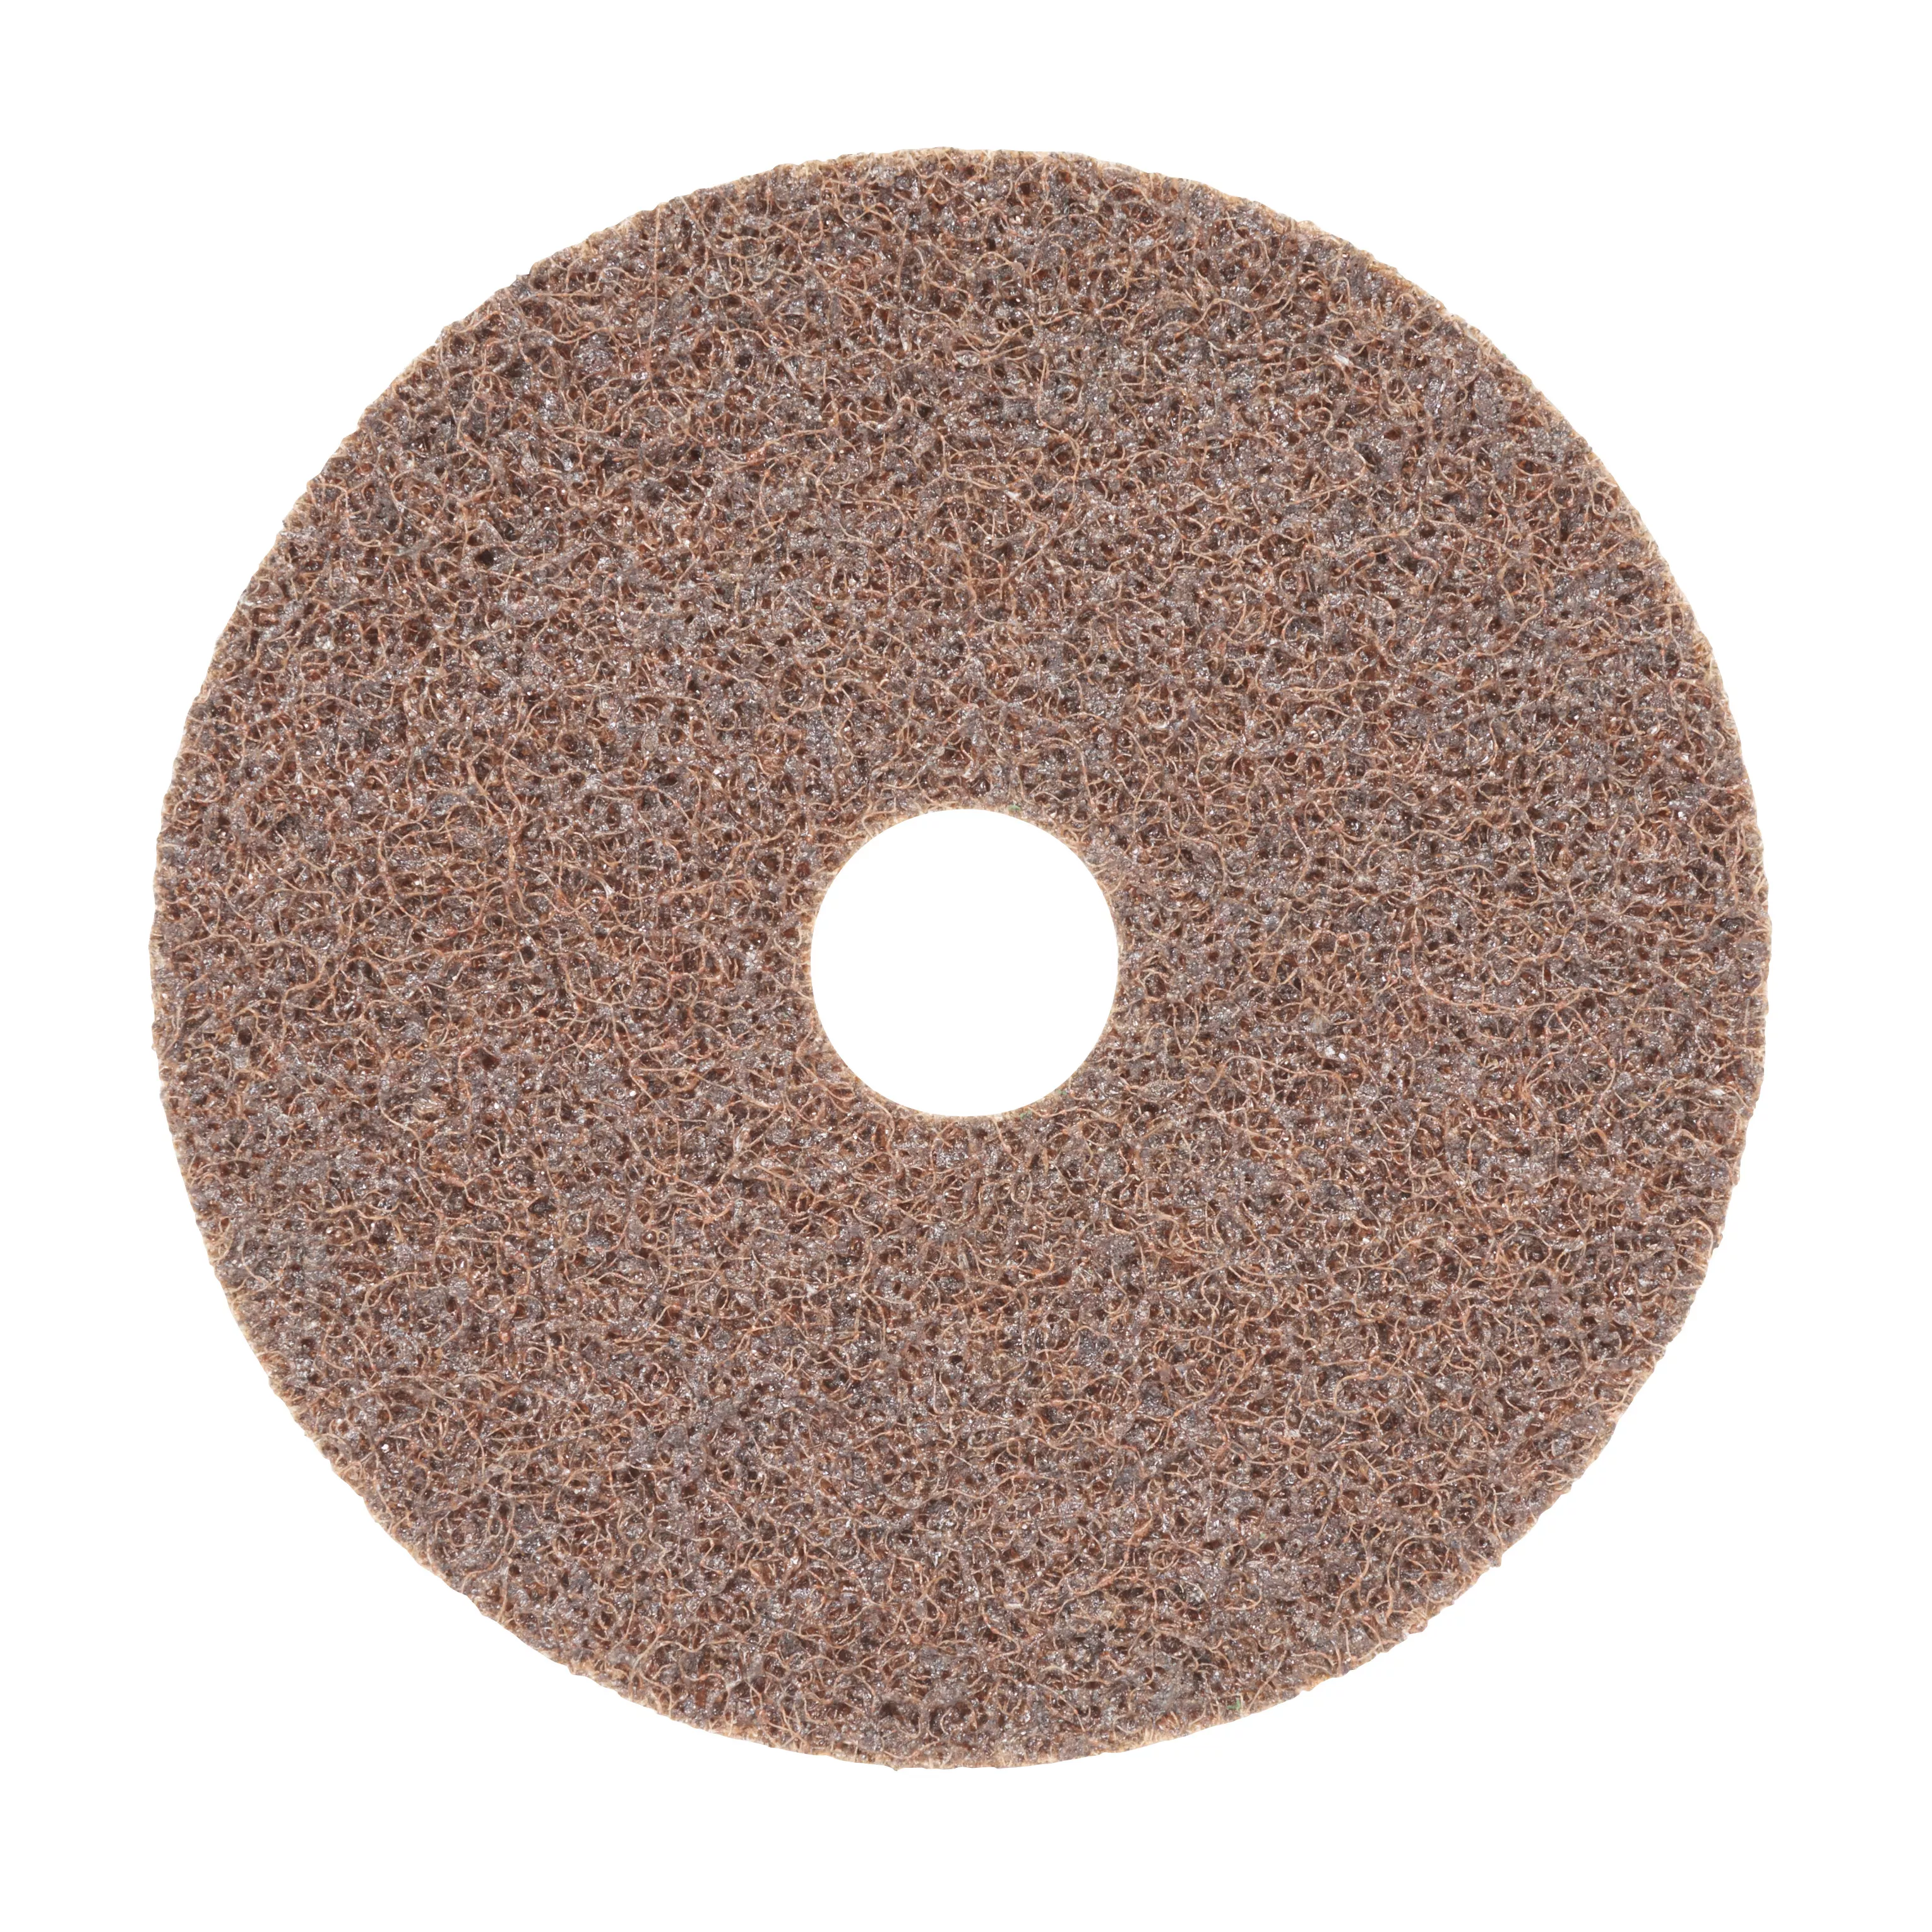 Scotch-Brite™ Surface Conditioning Low Stretch Disc, 4 1/2 in x 7/8 in,
SE A CRS, 50 ea/Case